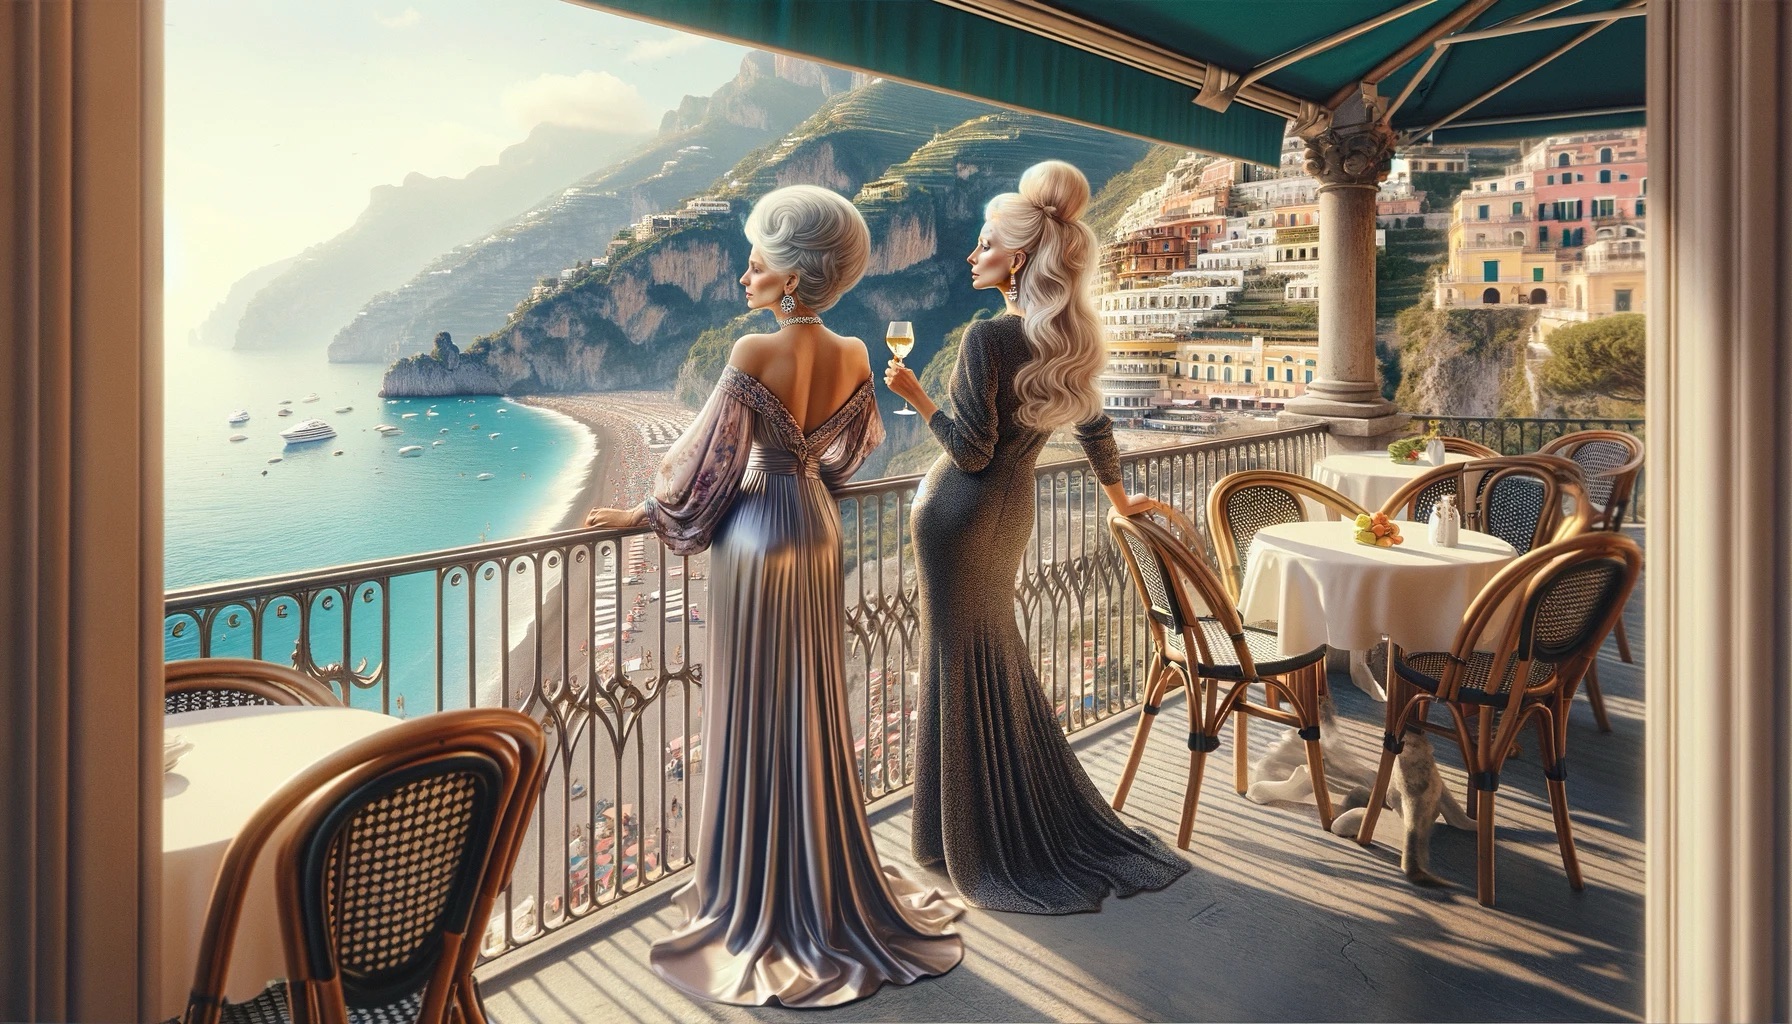 An image of Kathy Fields and Marie Read - Saia overlooking the Amalfi Coast on Mother’s Day